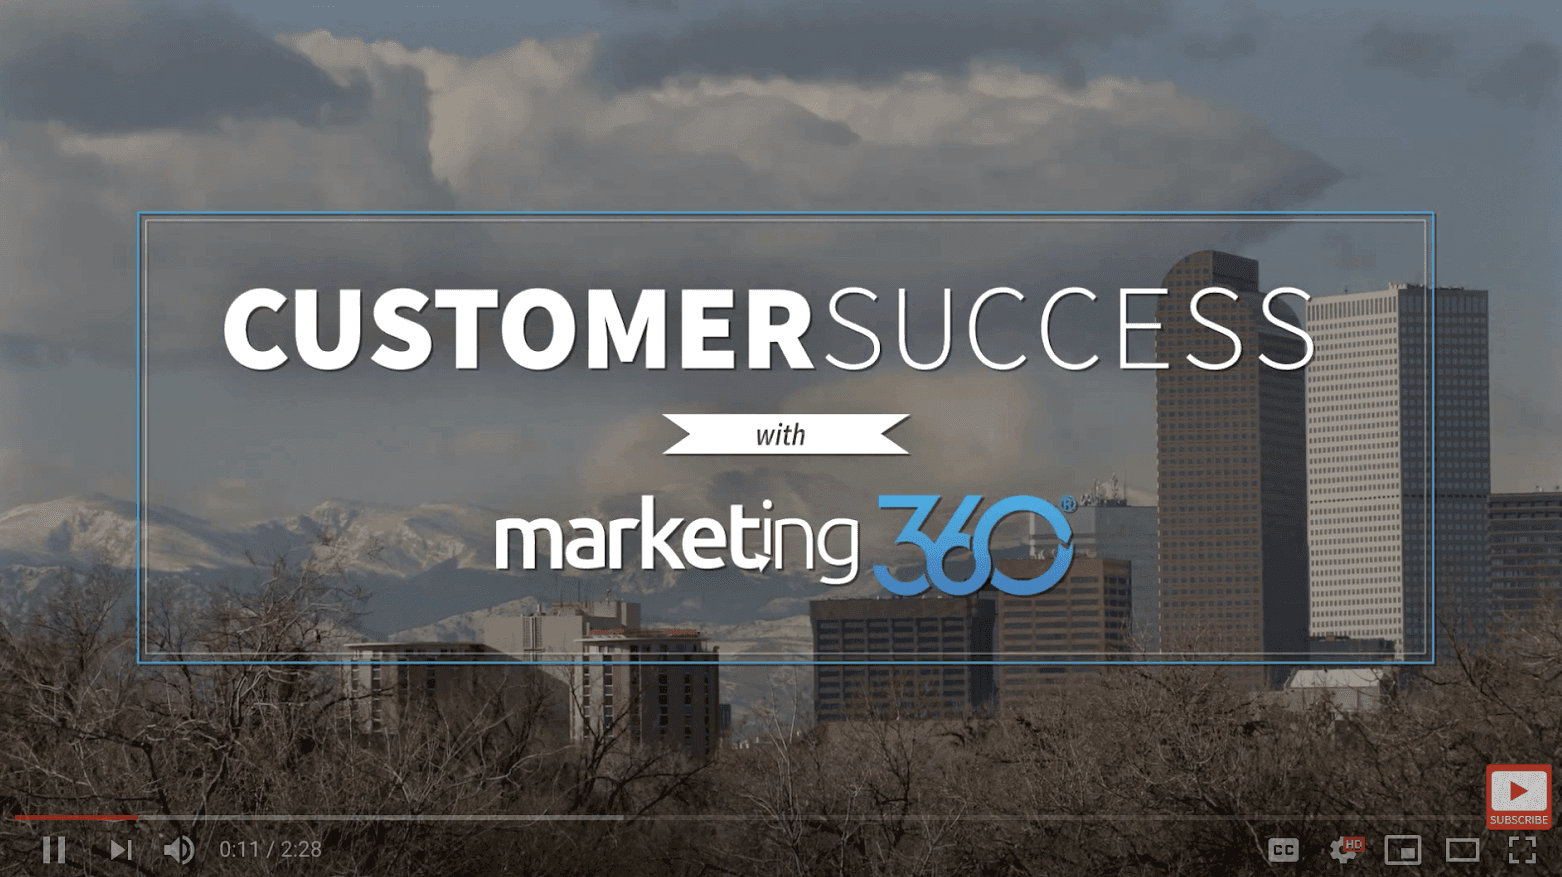 Screenshot of the Customer Success with Marketing 360 from Liftech